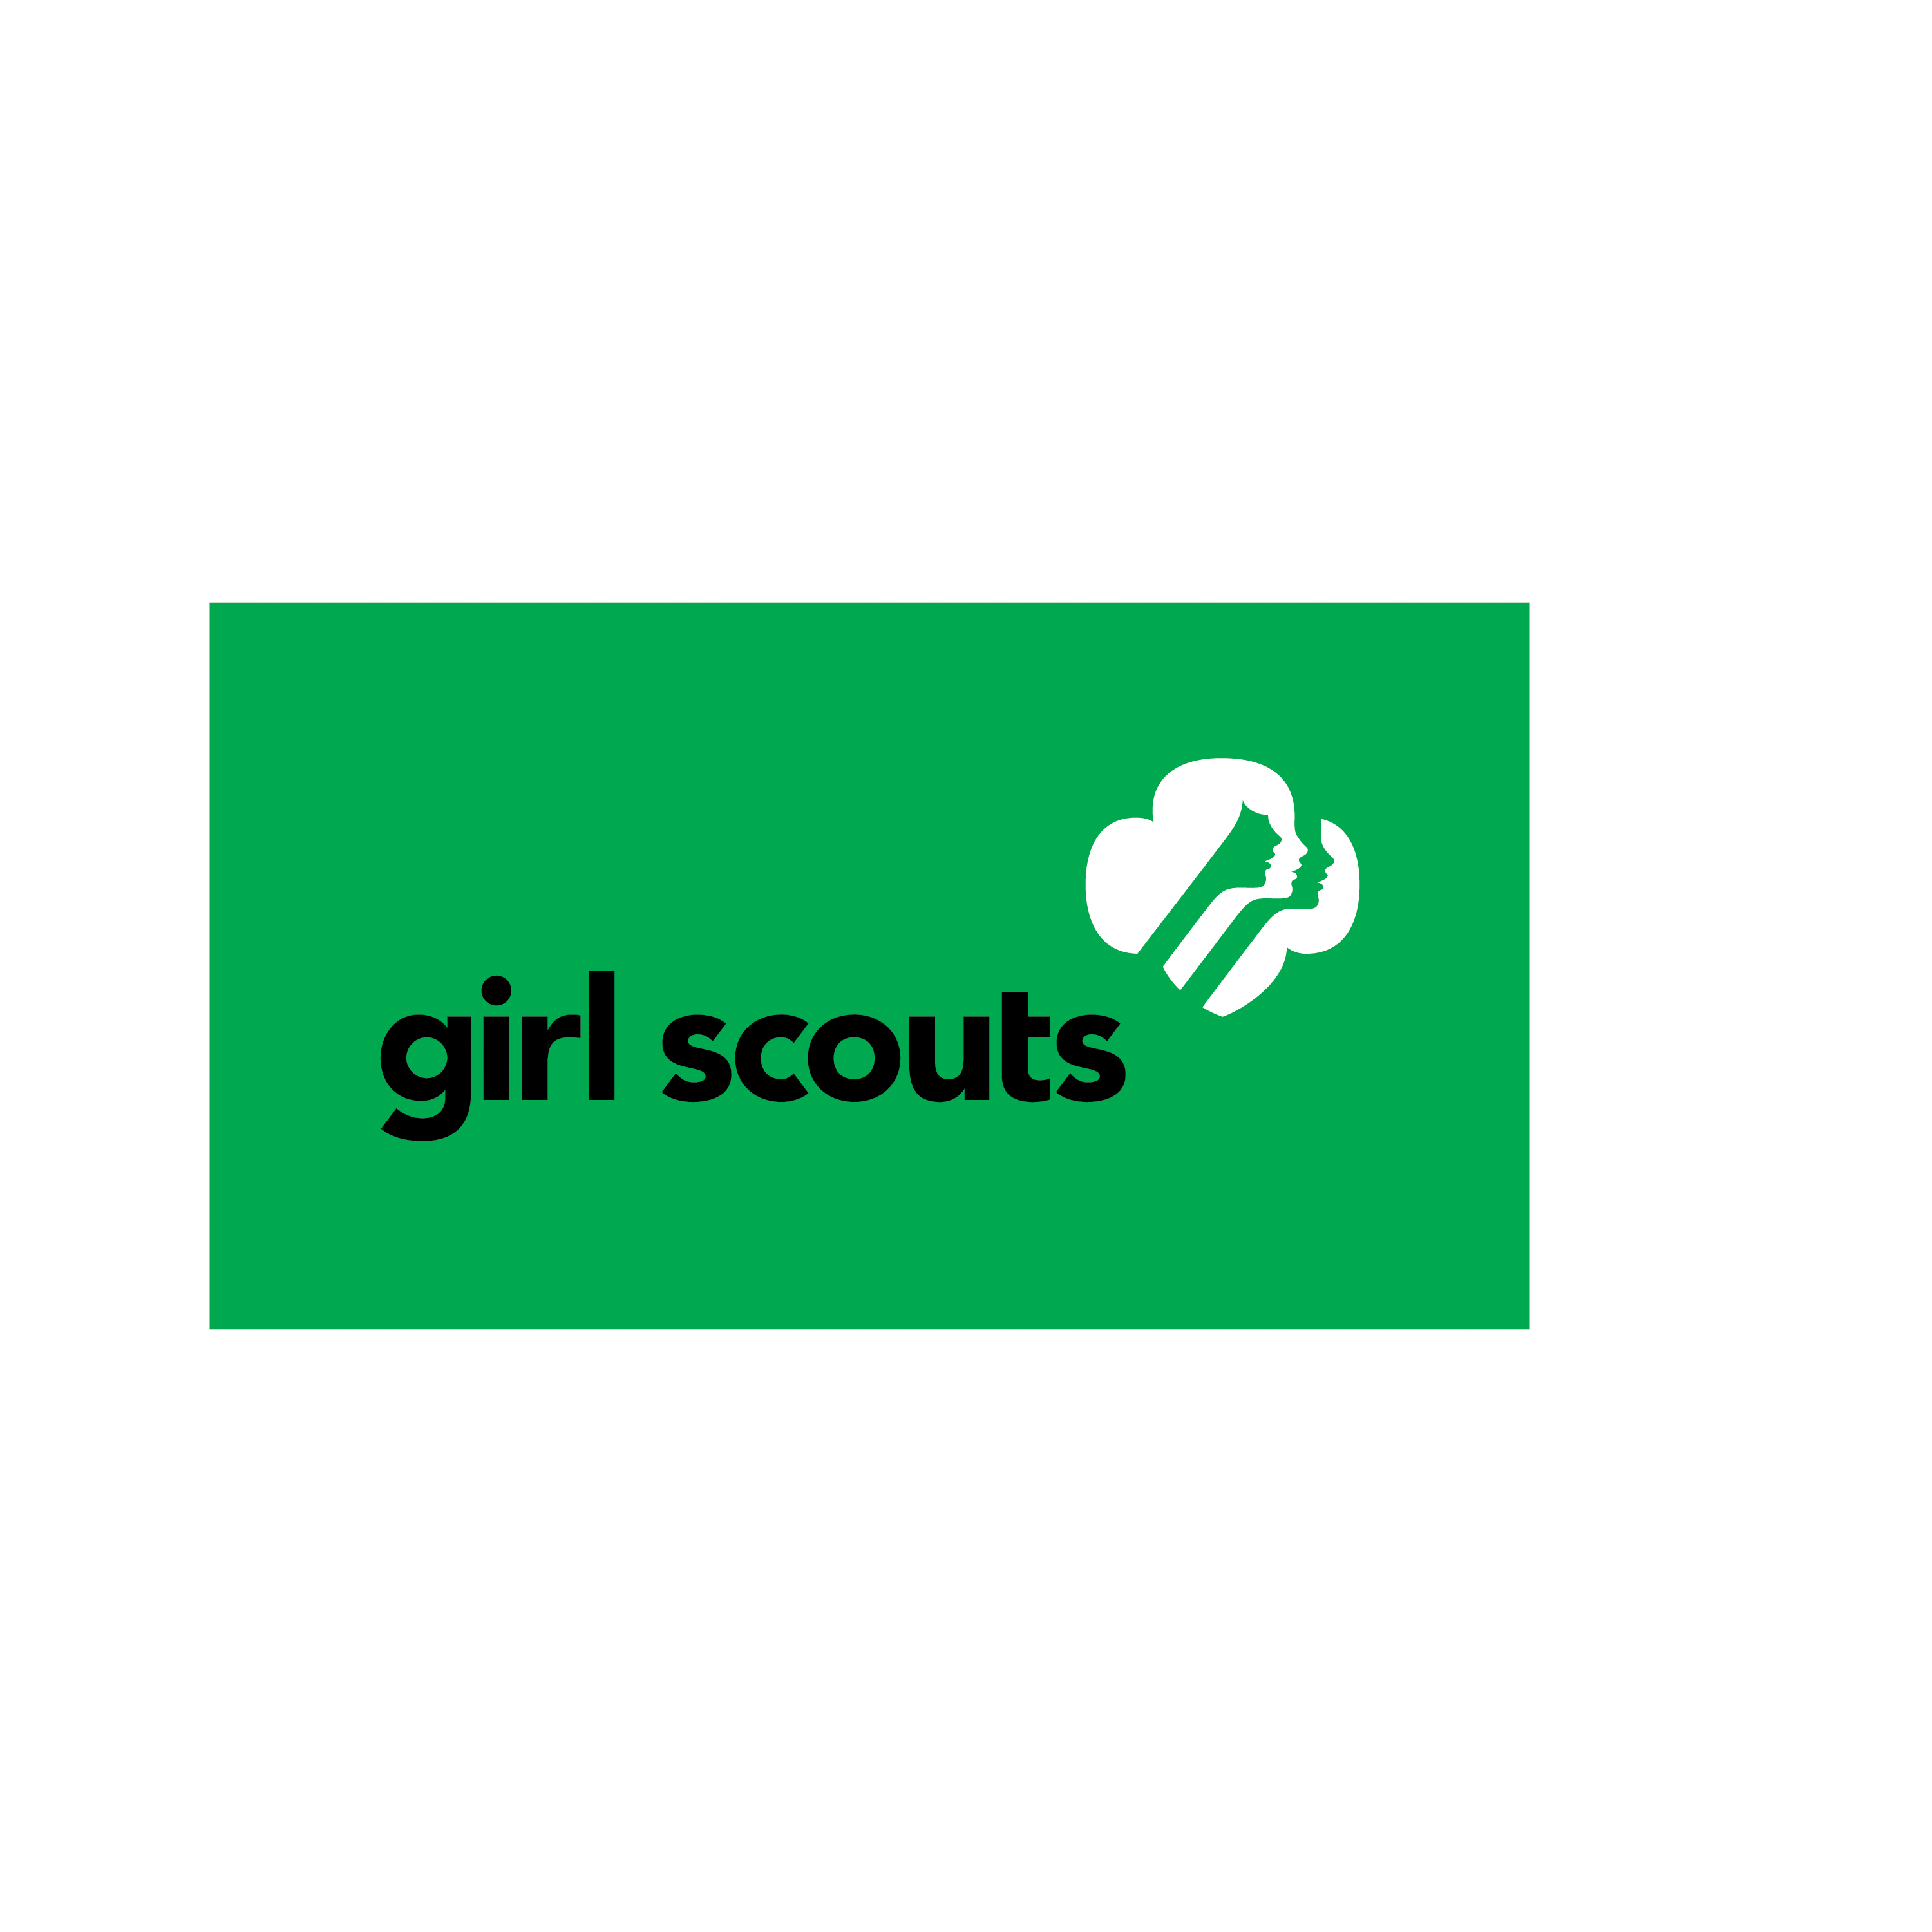 10 Girl Scout Clip Art Logo Free Cliparts That You Can Download To You